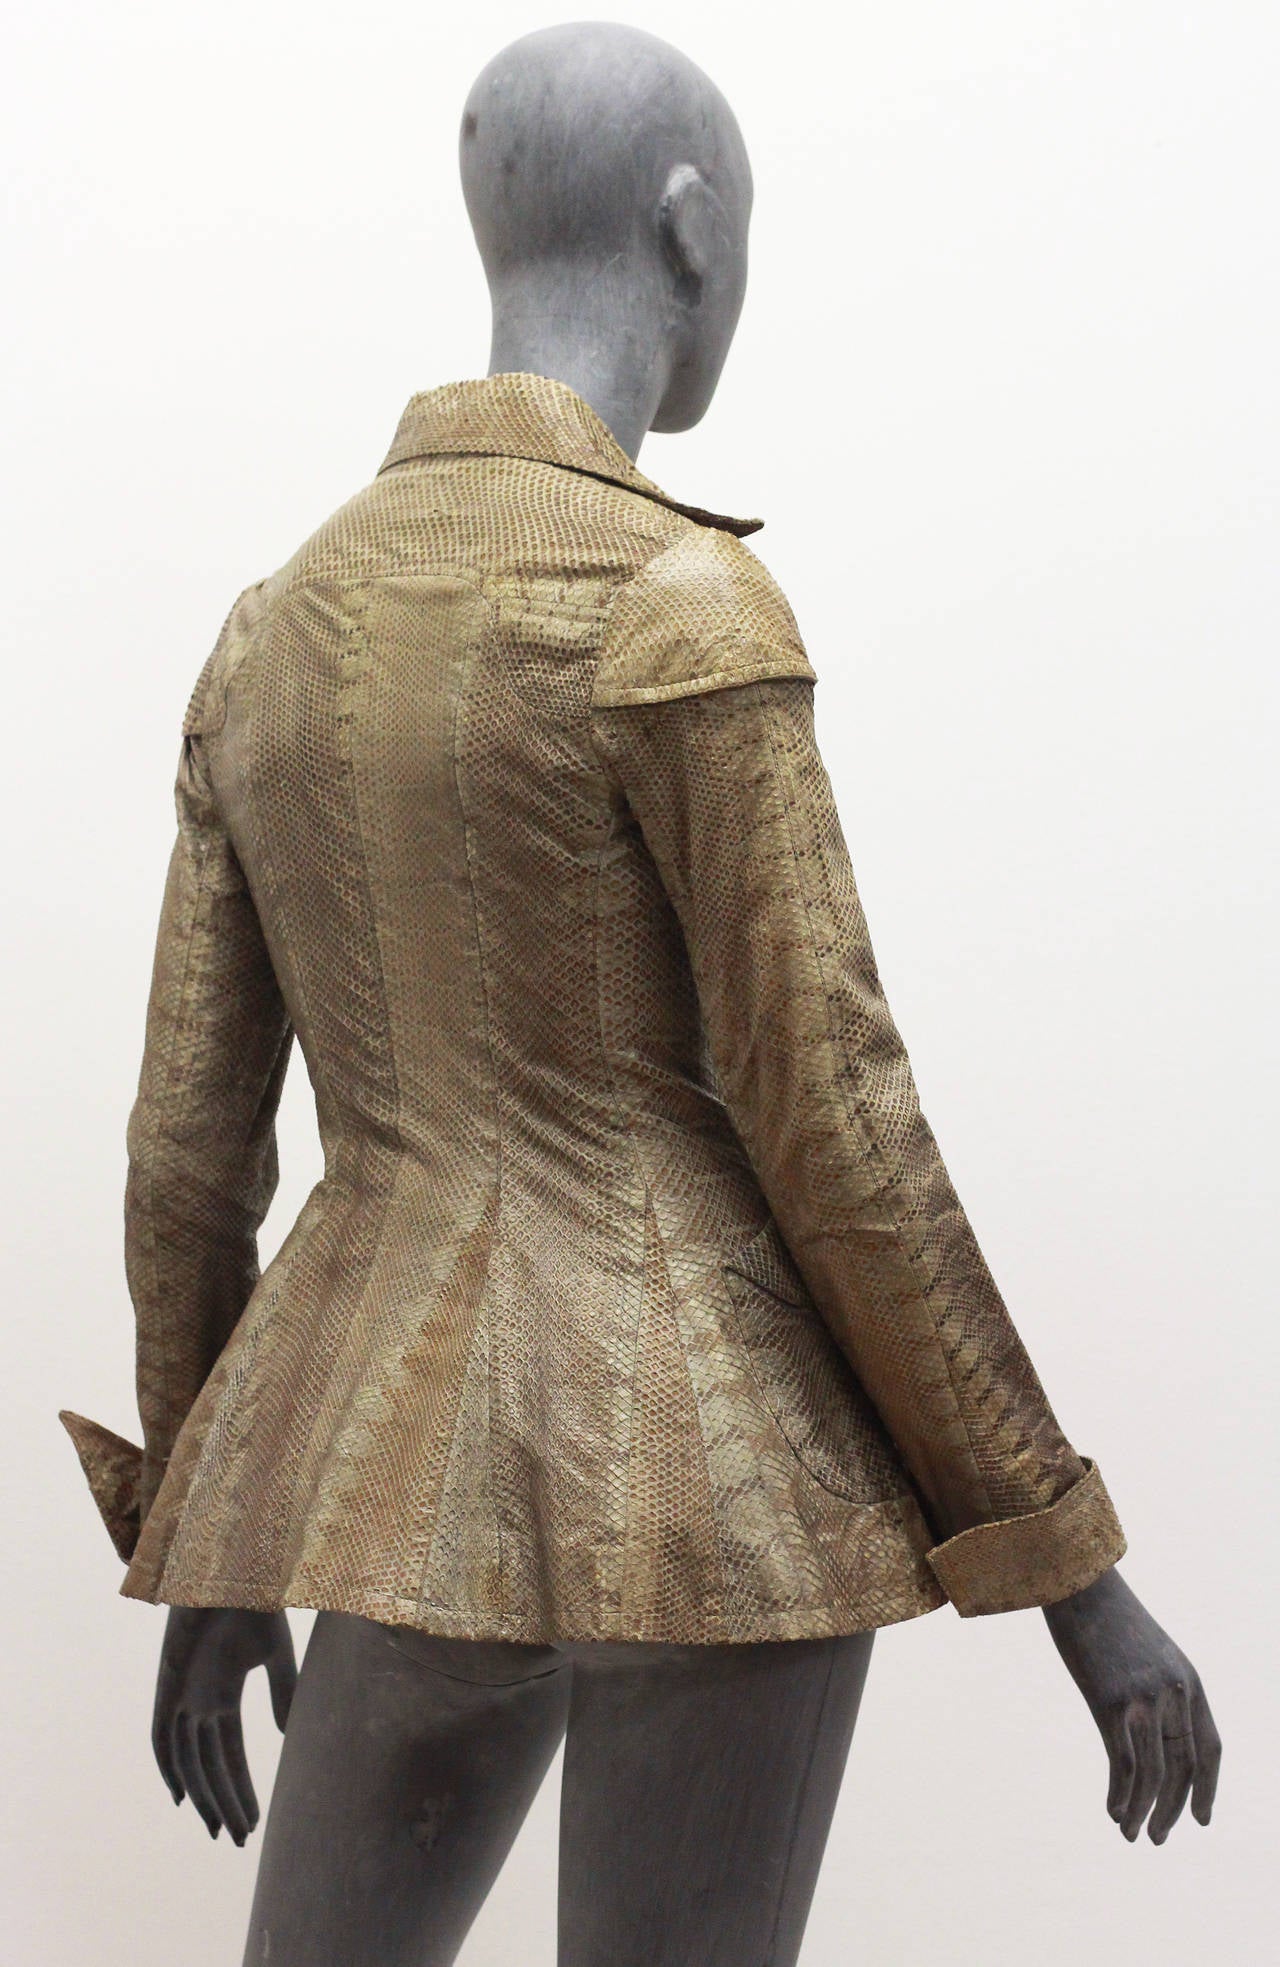 A fine and rare snakeskin jacket by Ossie Clark. The jacket features a metal zipper closure, pointed collar and cuff and two front pockets. 

Size: Labelled size 10 but today it would be a UK size 6-8 (Fr 34-36/US XS-S)